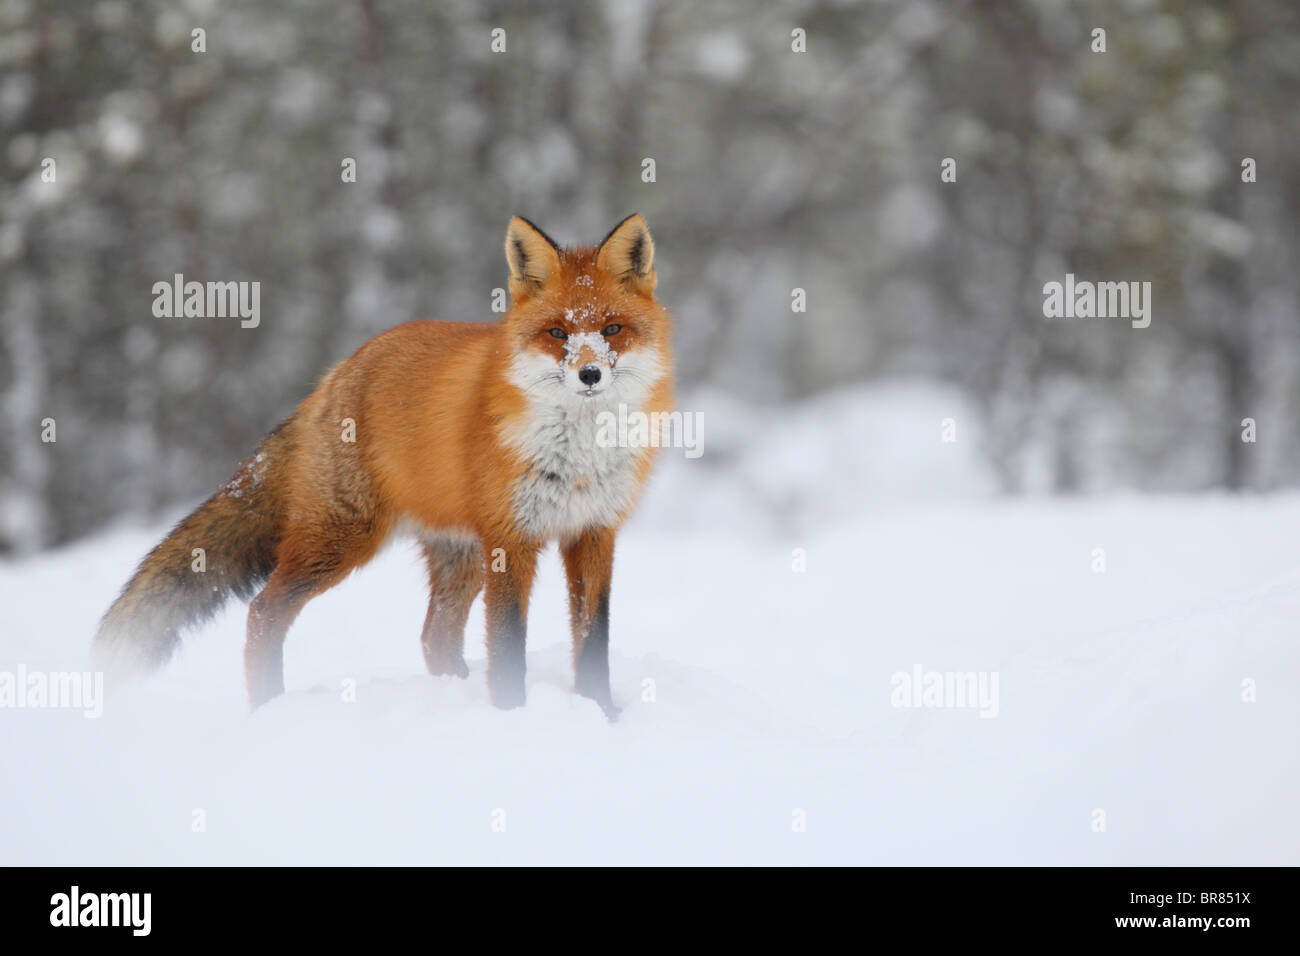 Wild Red Fox (Vulpes vulpes) with snowy nose. Stock Photo